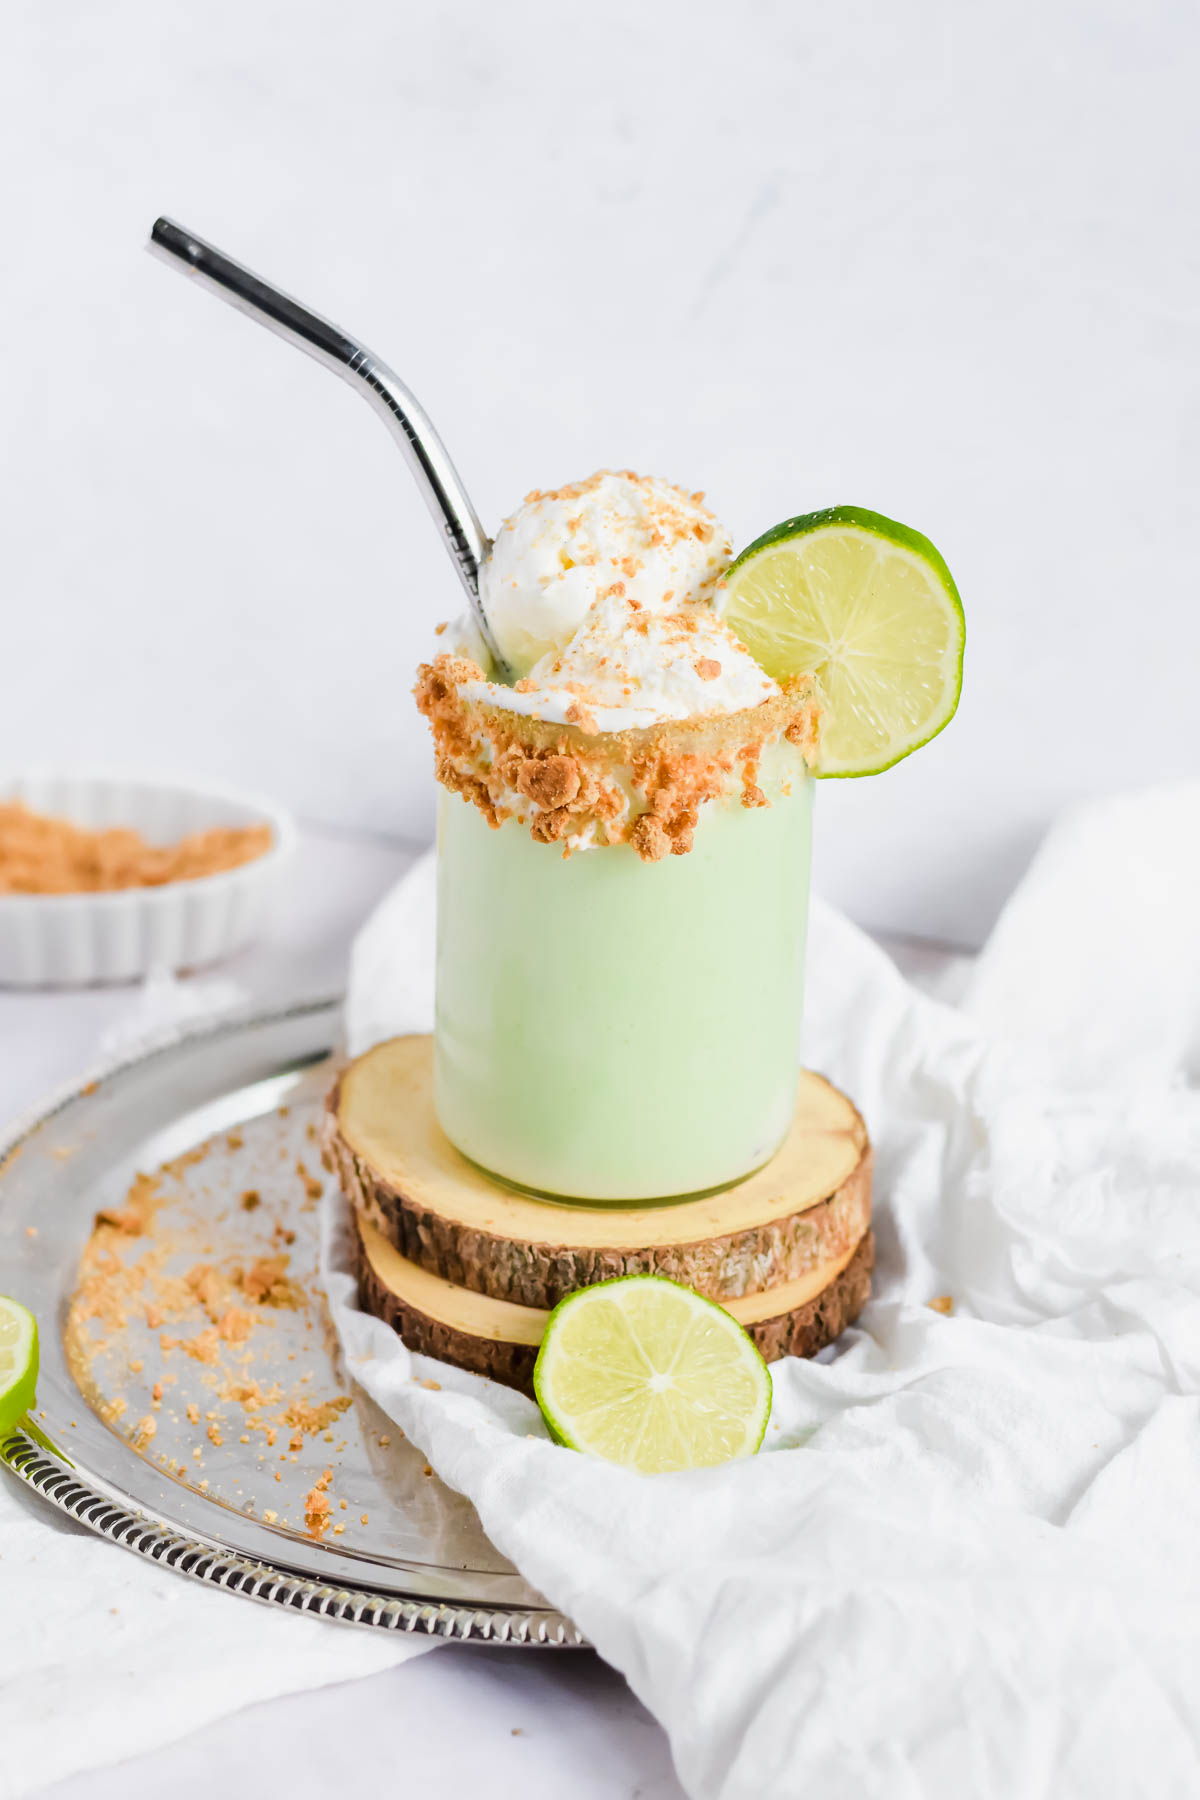 Key Lime Pie Milkshake topped with Cool Whip, crumbled graham cracker and a slice of lime with a metal straw.